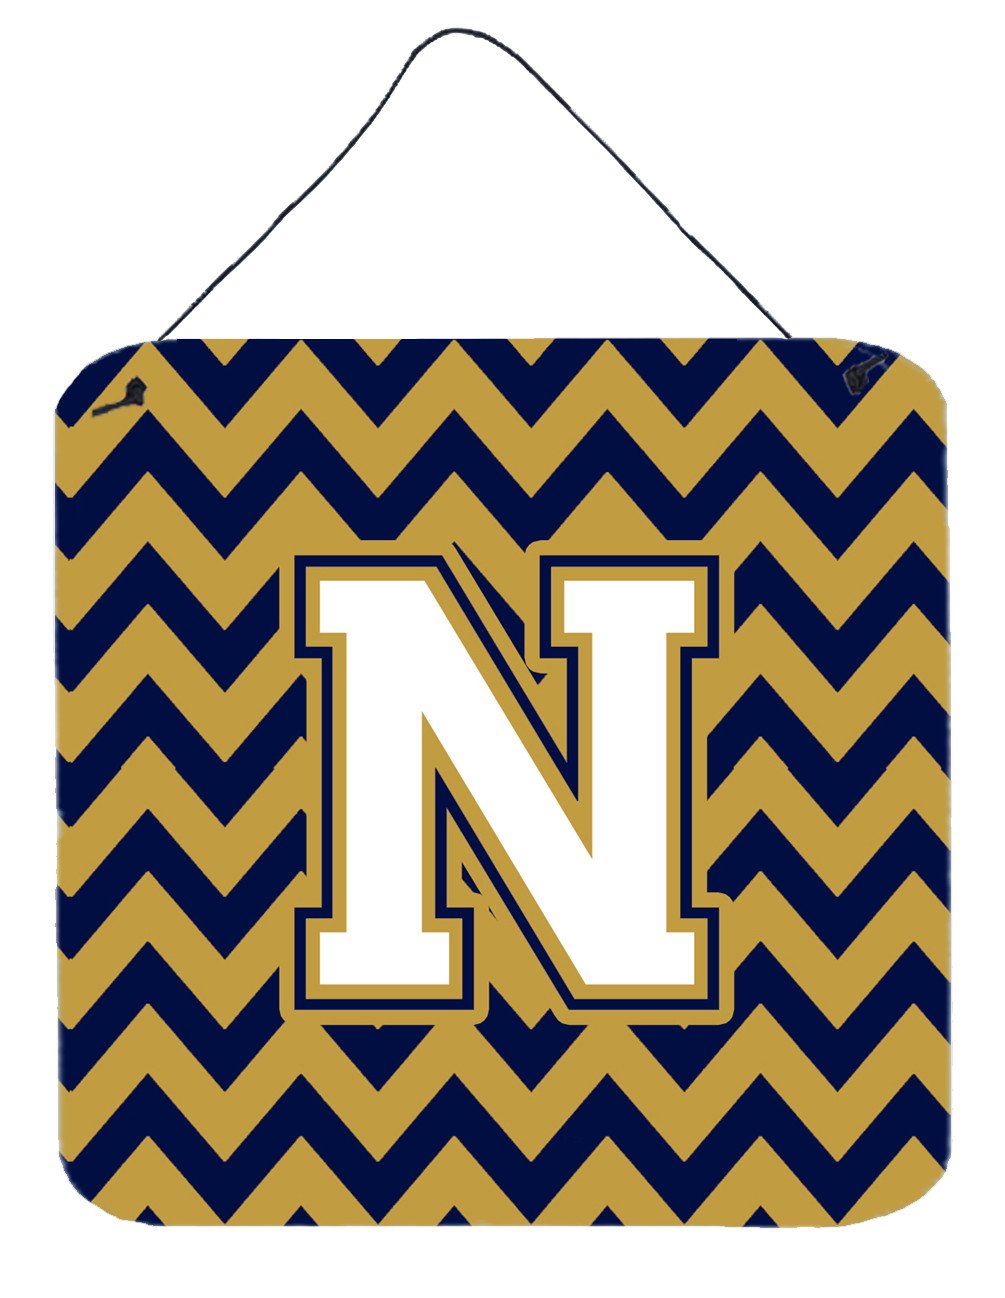 Letter N Chevron Navy Blue and Gold Wall or Door Hanging Prints CJ1057-NDS66 by Caroline's Treasures